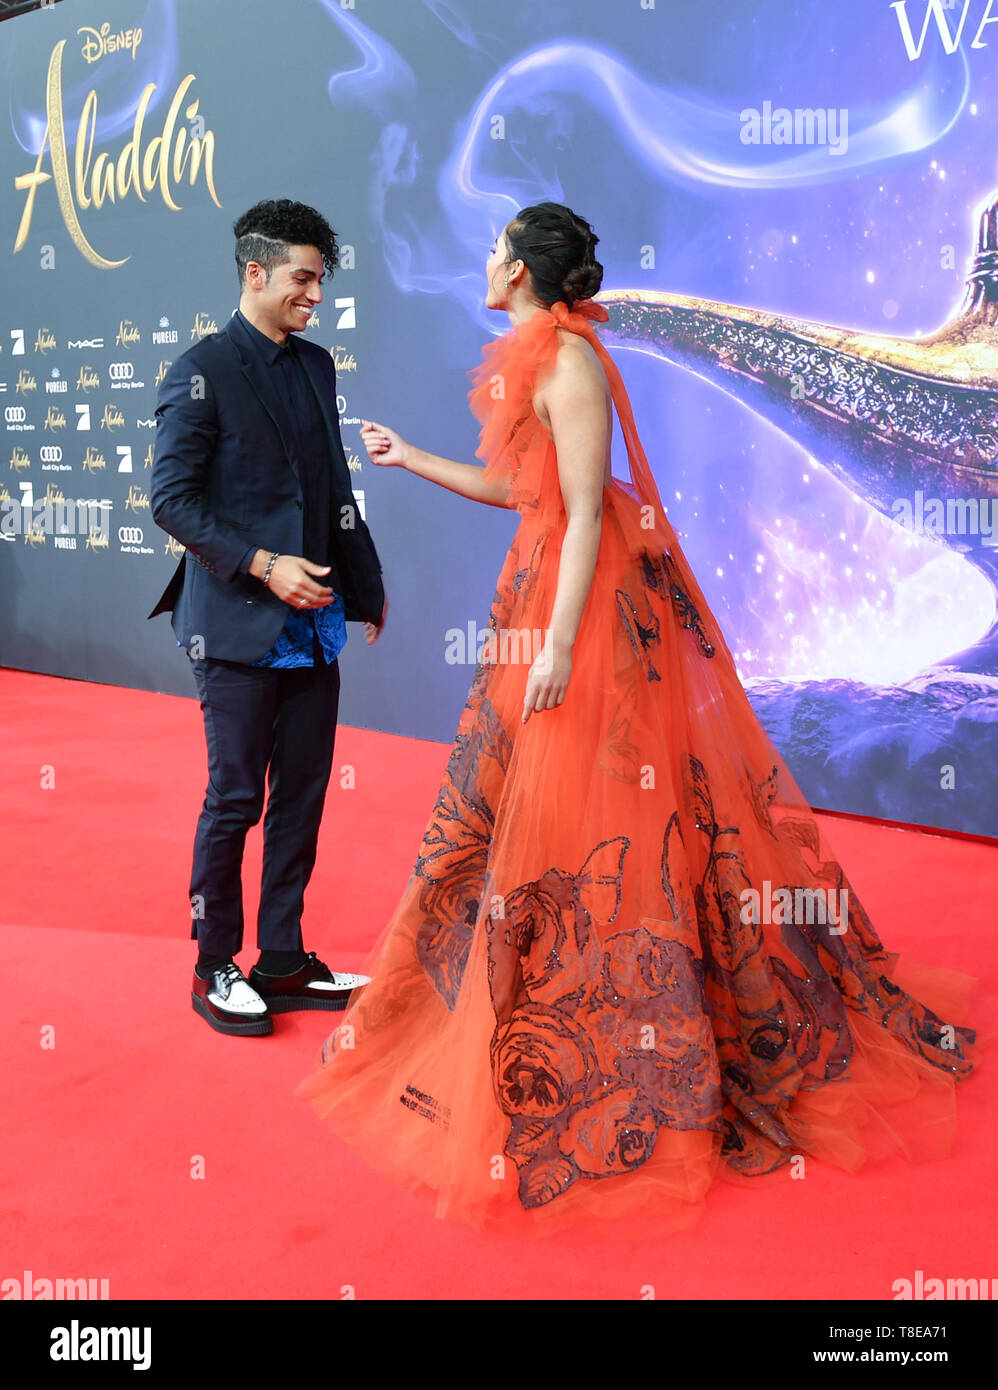 Berlin, Germany. 11th May, 2019. The actors Mena Massoud (l) and Naomi Scott at the gala screening of the film 'Aladdin' at the cinema UCI Luxe Mercedes Square. The film will be released in German cinemas on 23.05.2019. The new Disney film is a real film adaptation of the 1992 cartoon of the same name and is based on the story Aladdin and the magic lamp from the fairy tales of 1001 Nights. Credit: Jens Kalaene/dpa-Zentralbild/dpa/Alamy Live News Stock Photo